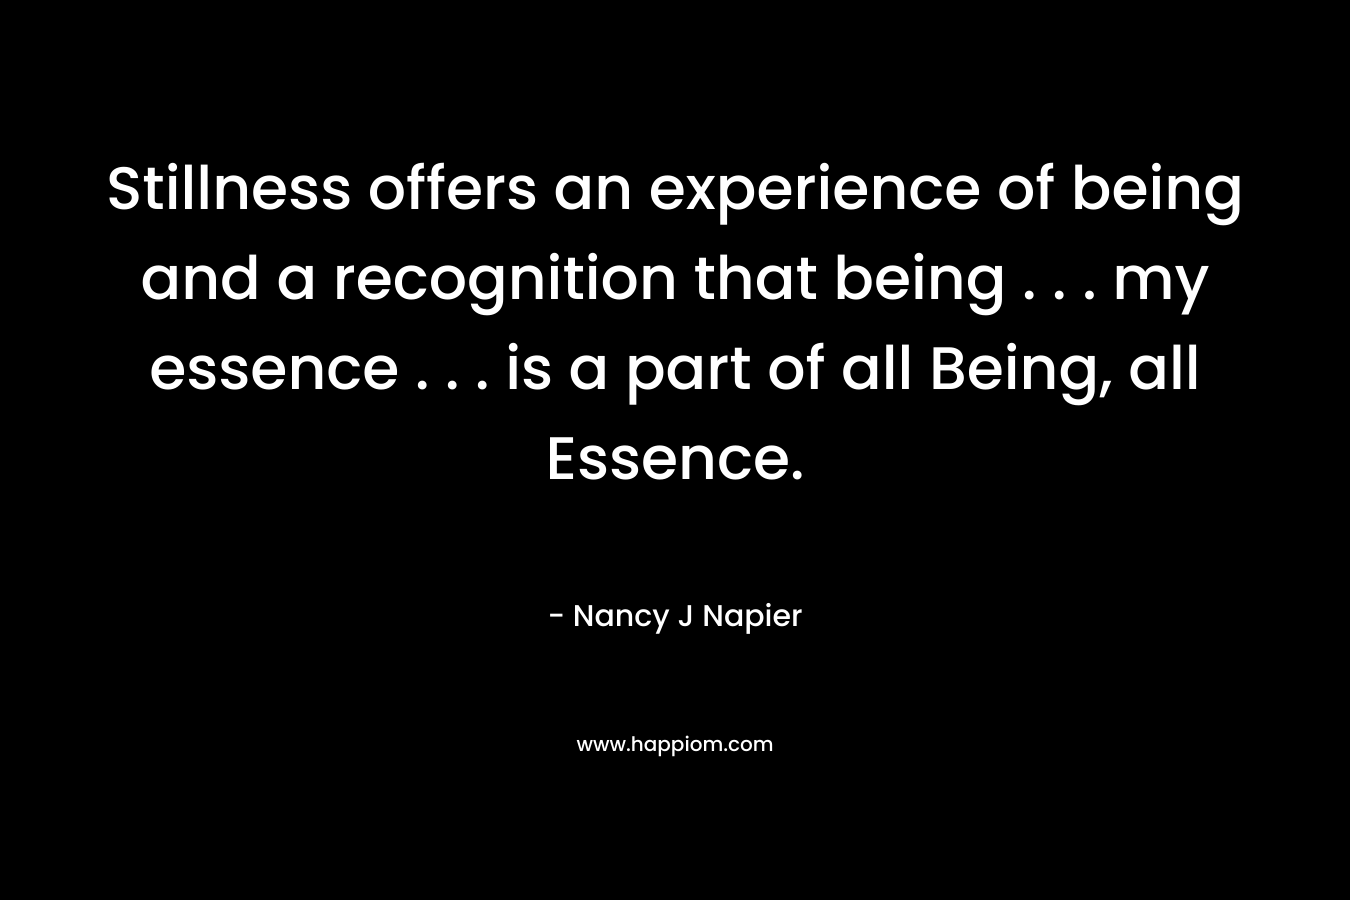 Stillness offers an experience of being and a recognition that being . . . my essence . . . is a part of all Being, all Essence.